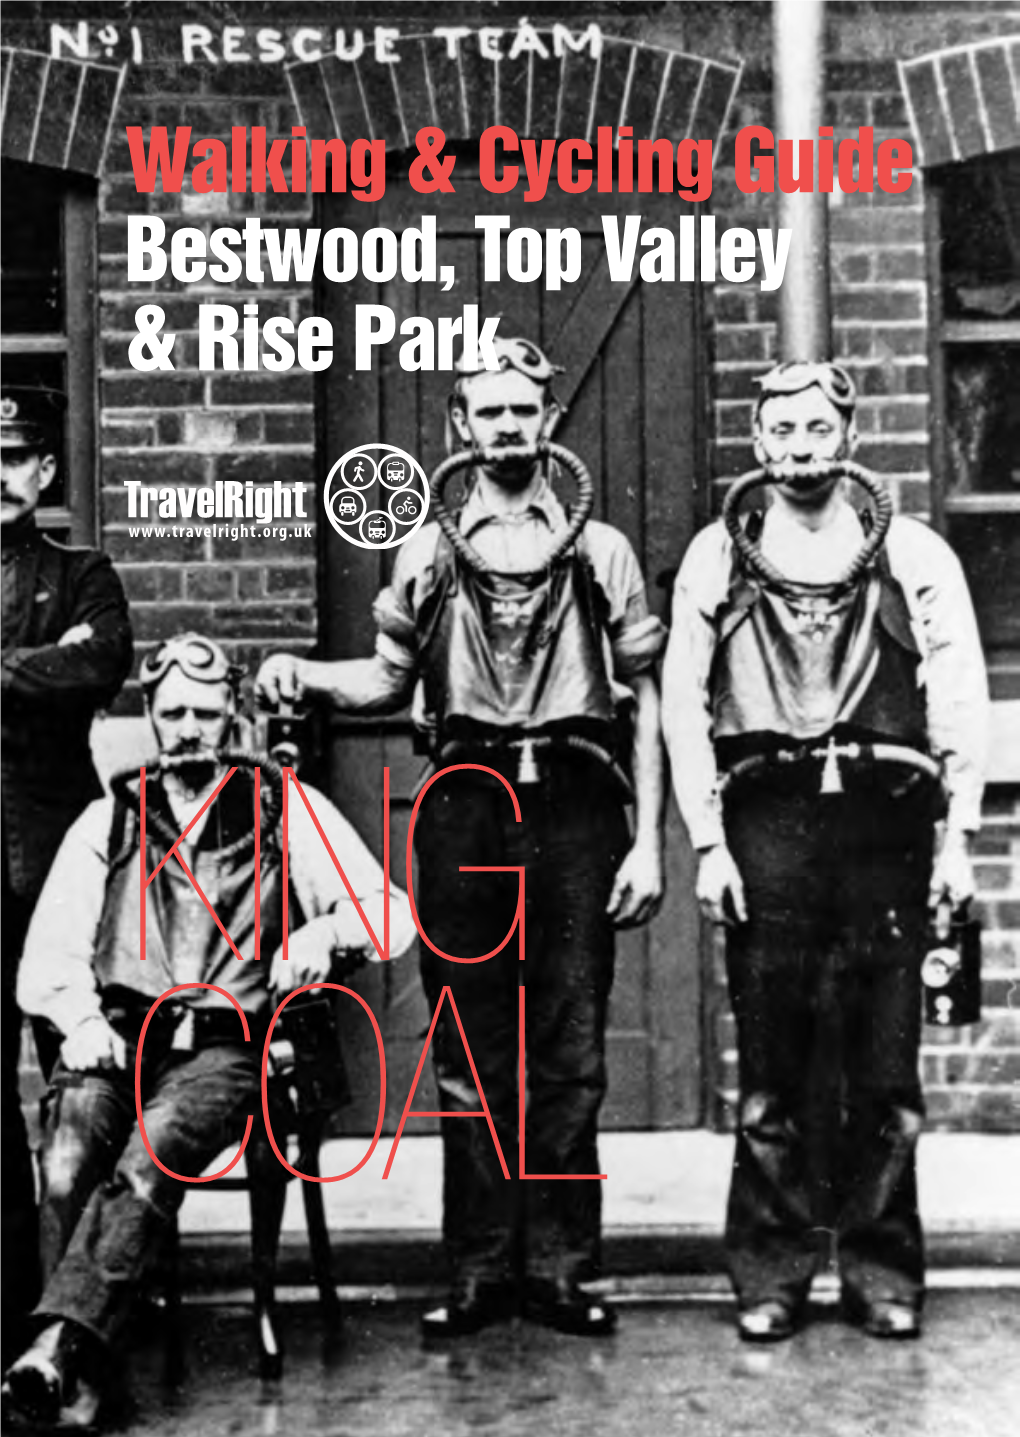 Bestwood, Top Valley & Rise Park